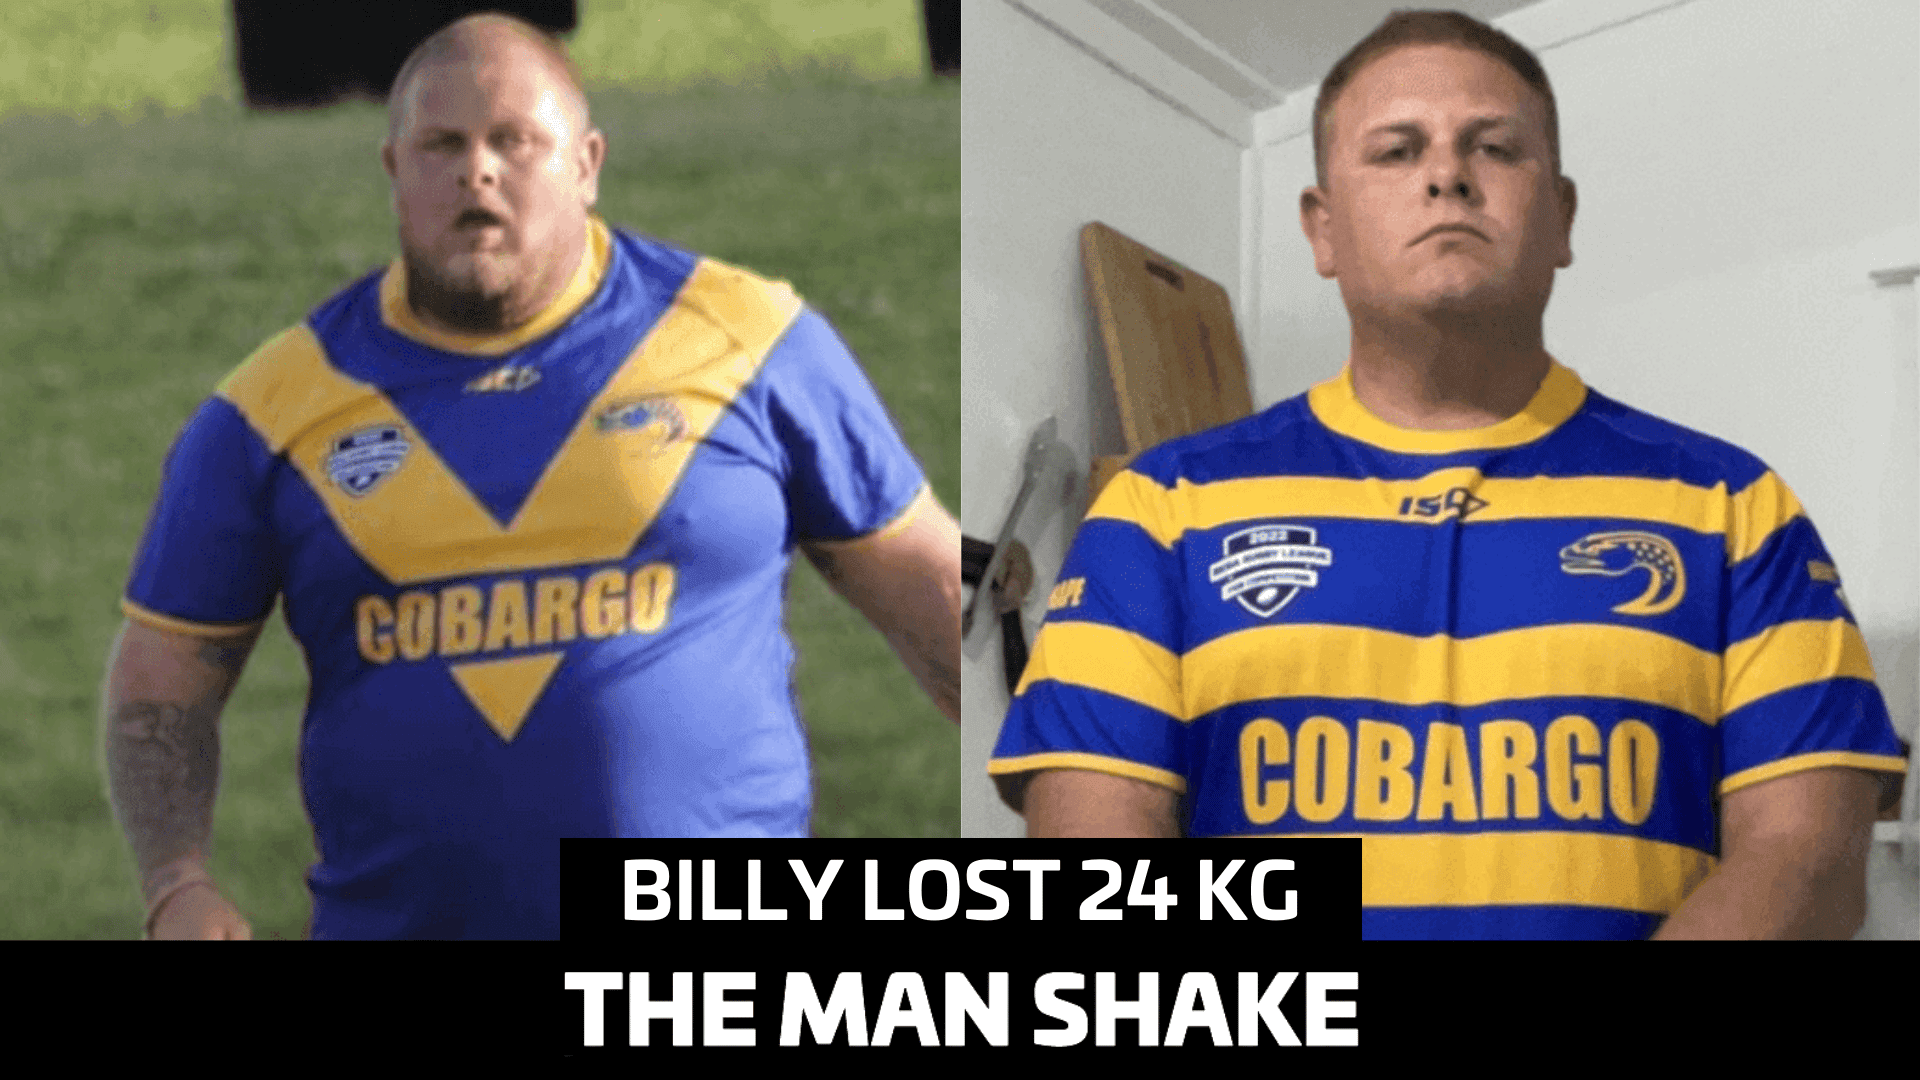 Billy set himself a goal and lost 24kg